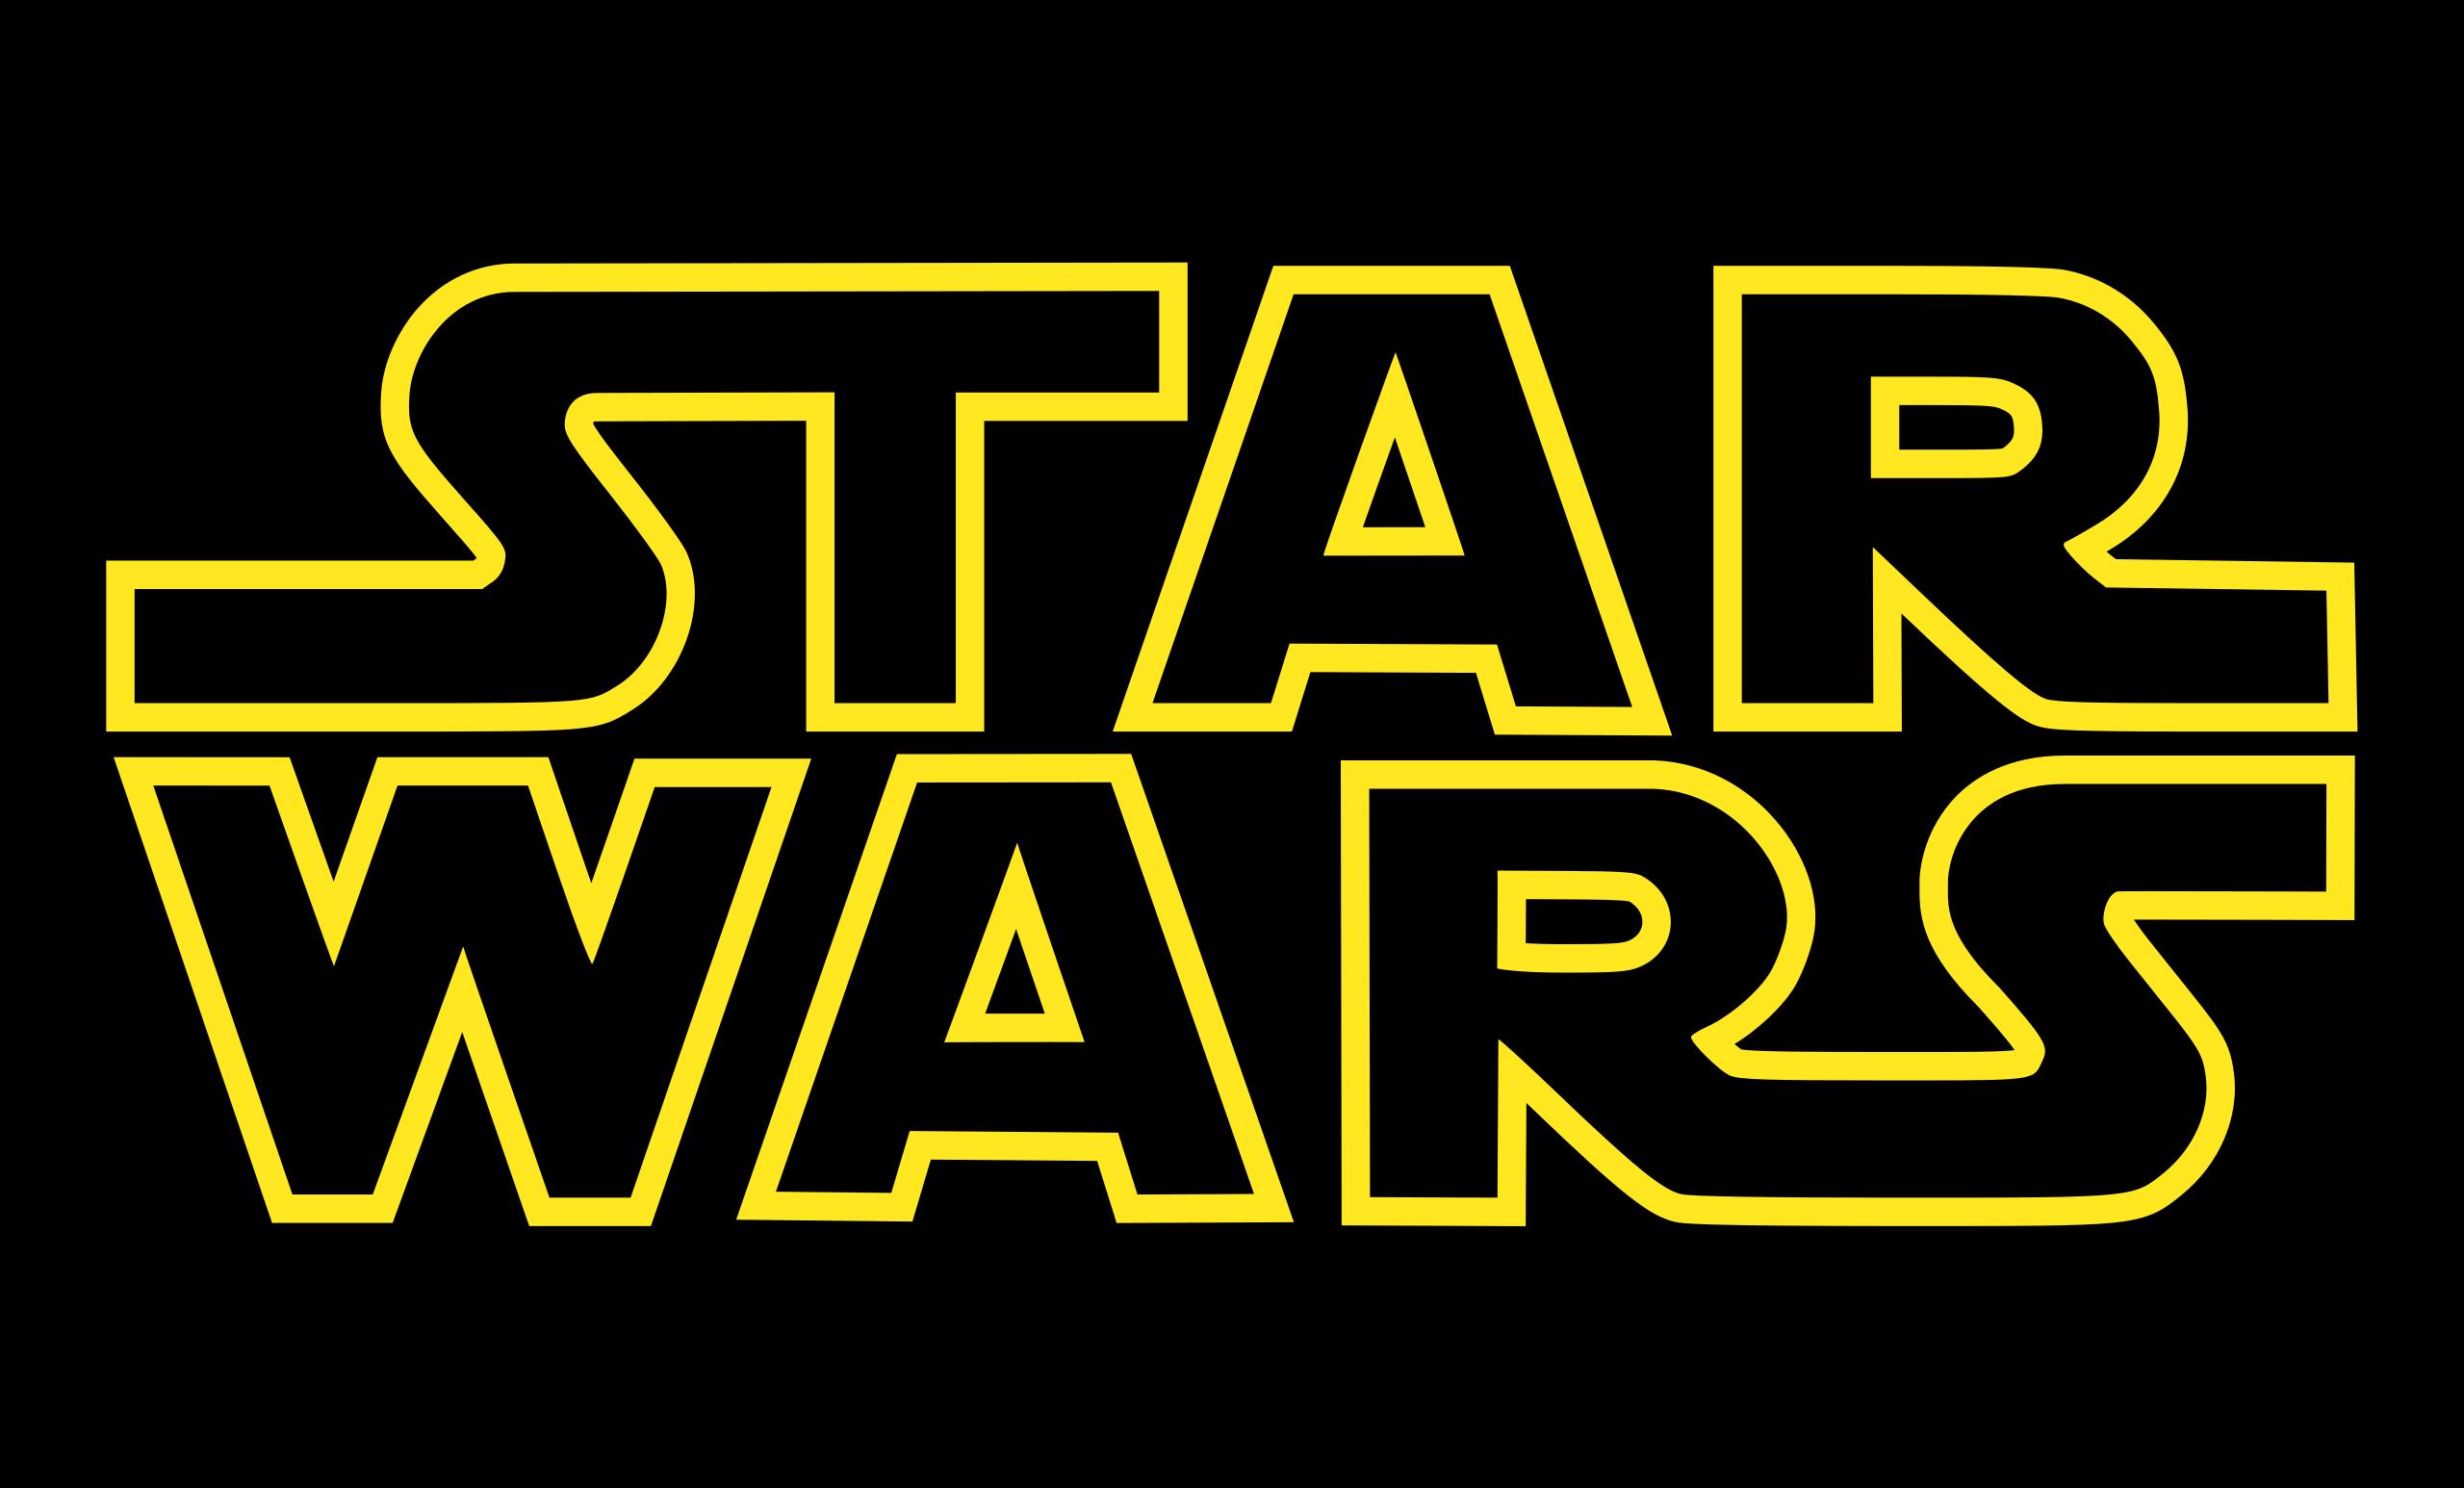 Star Wars Logo An Ultimate Guide for Fans